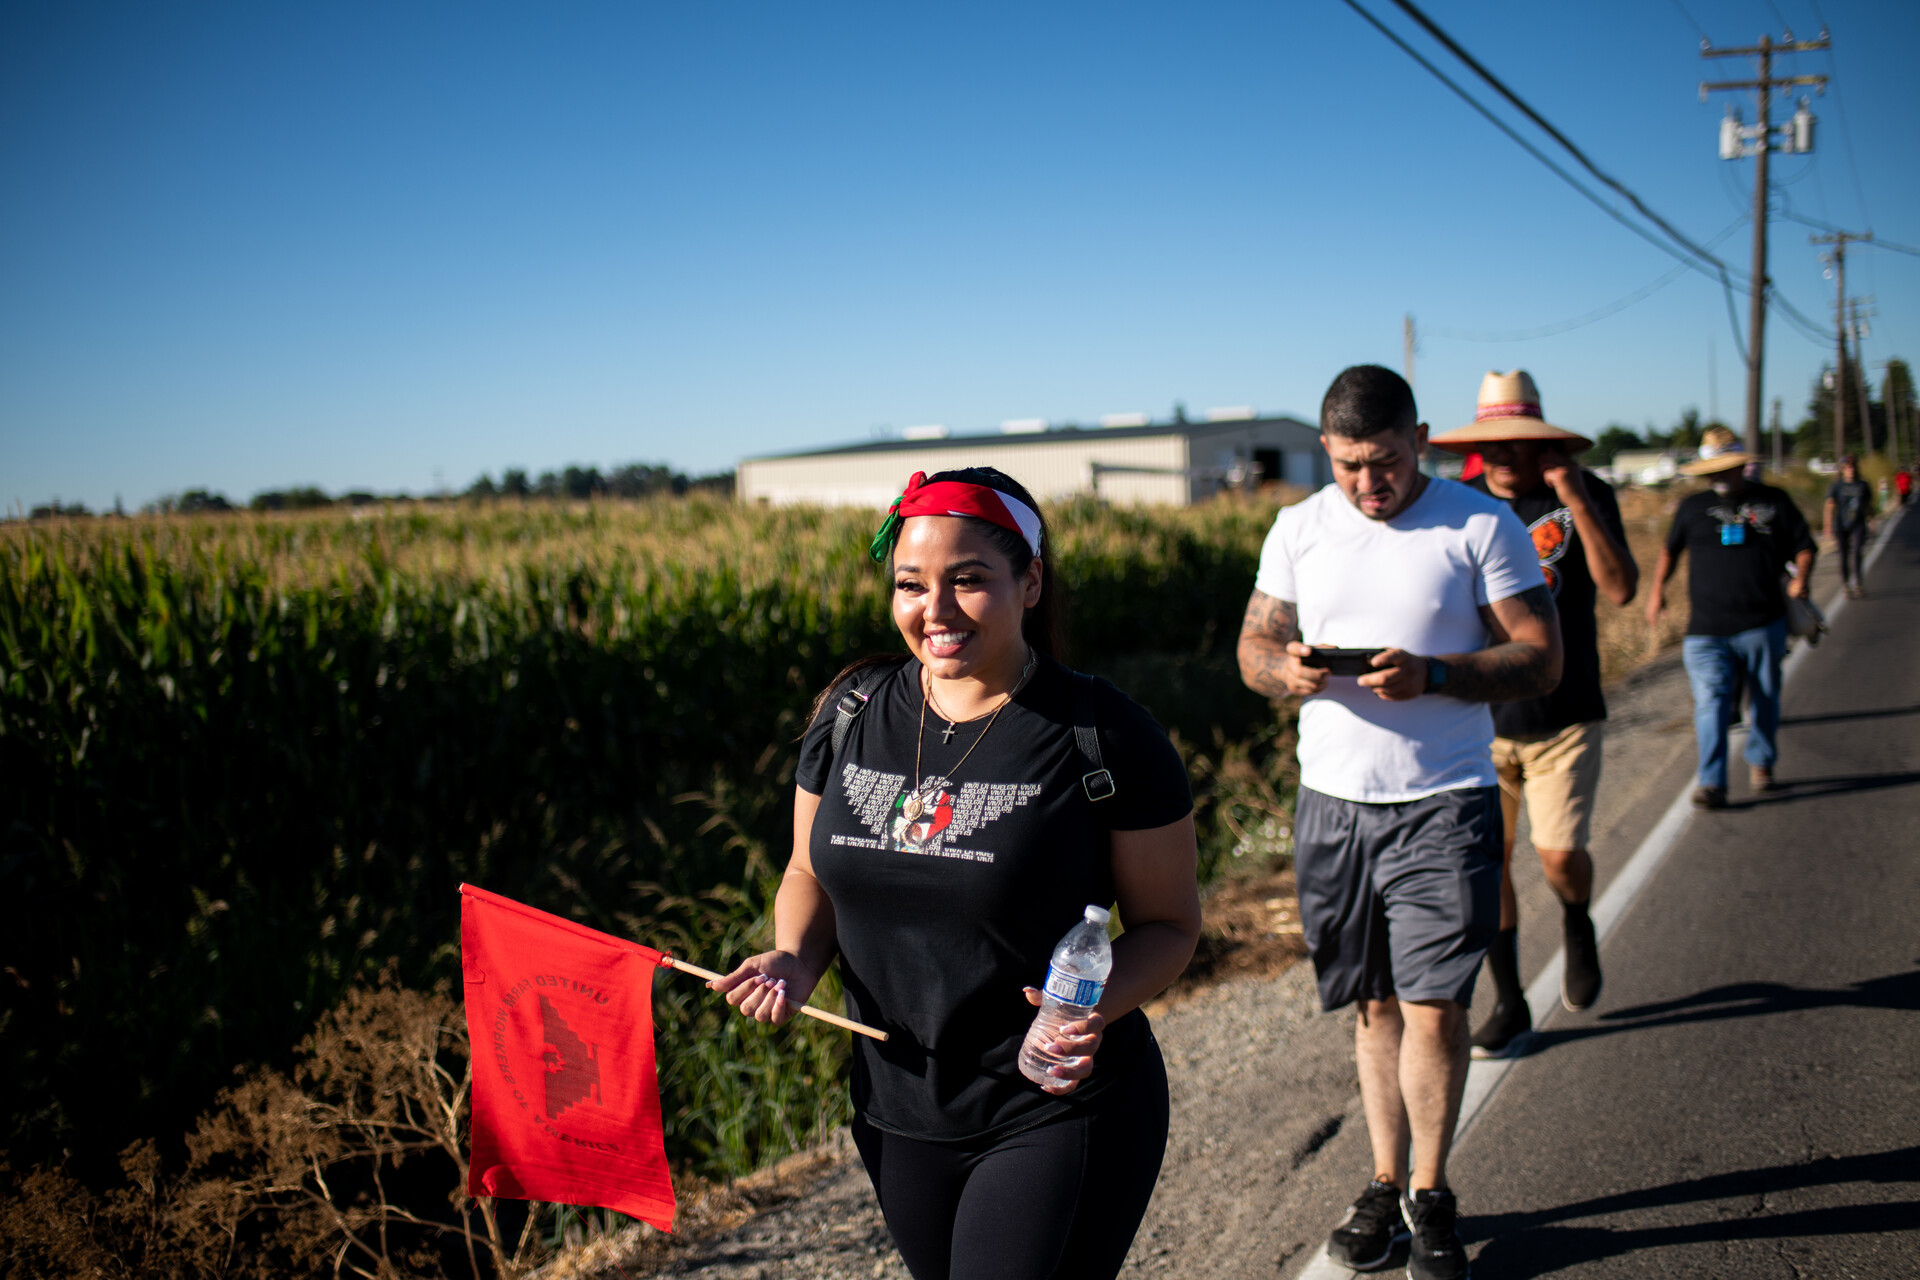 smiling woman holds red flag as she walks at front of line of marchers along rural road in the sunshine